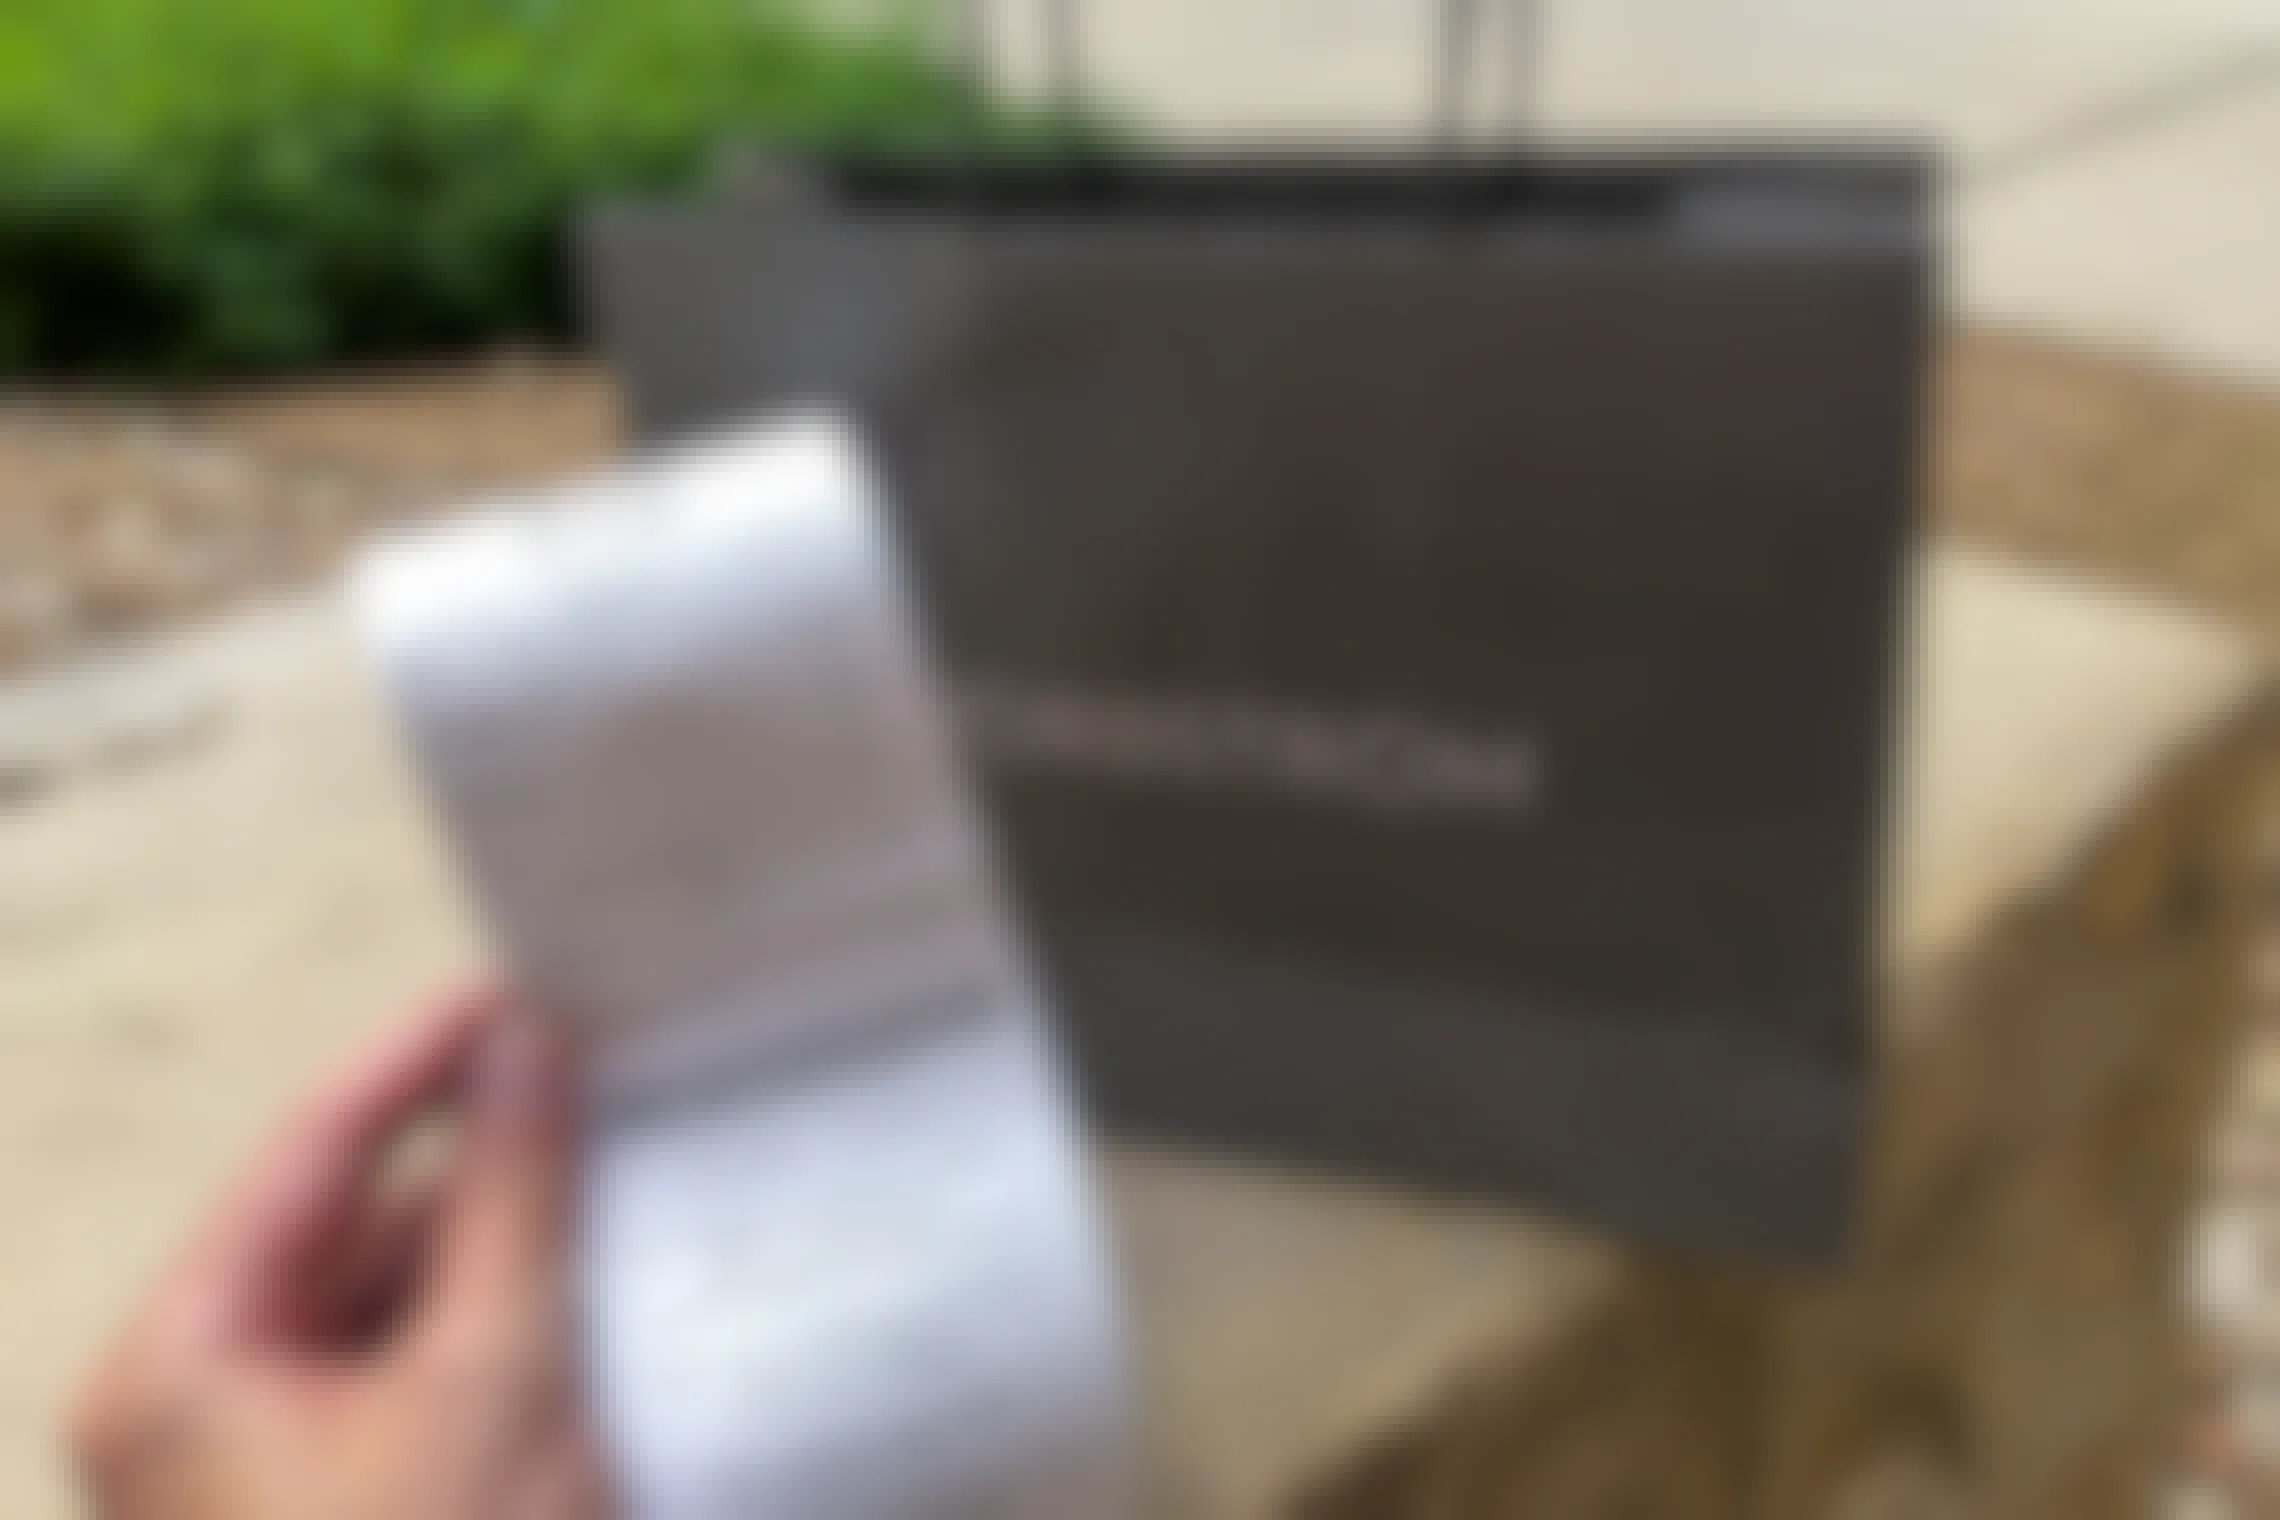 Nordstrom receipt held up in front of a bag